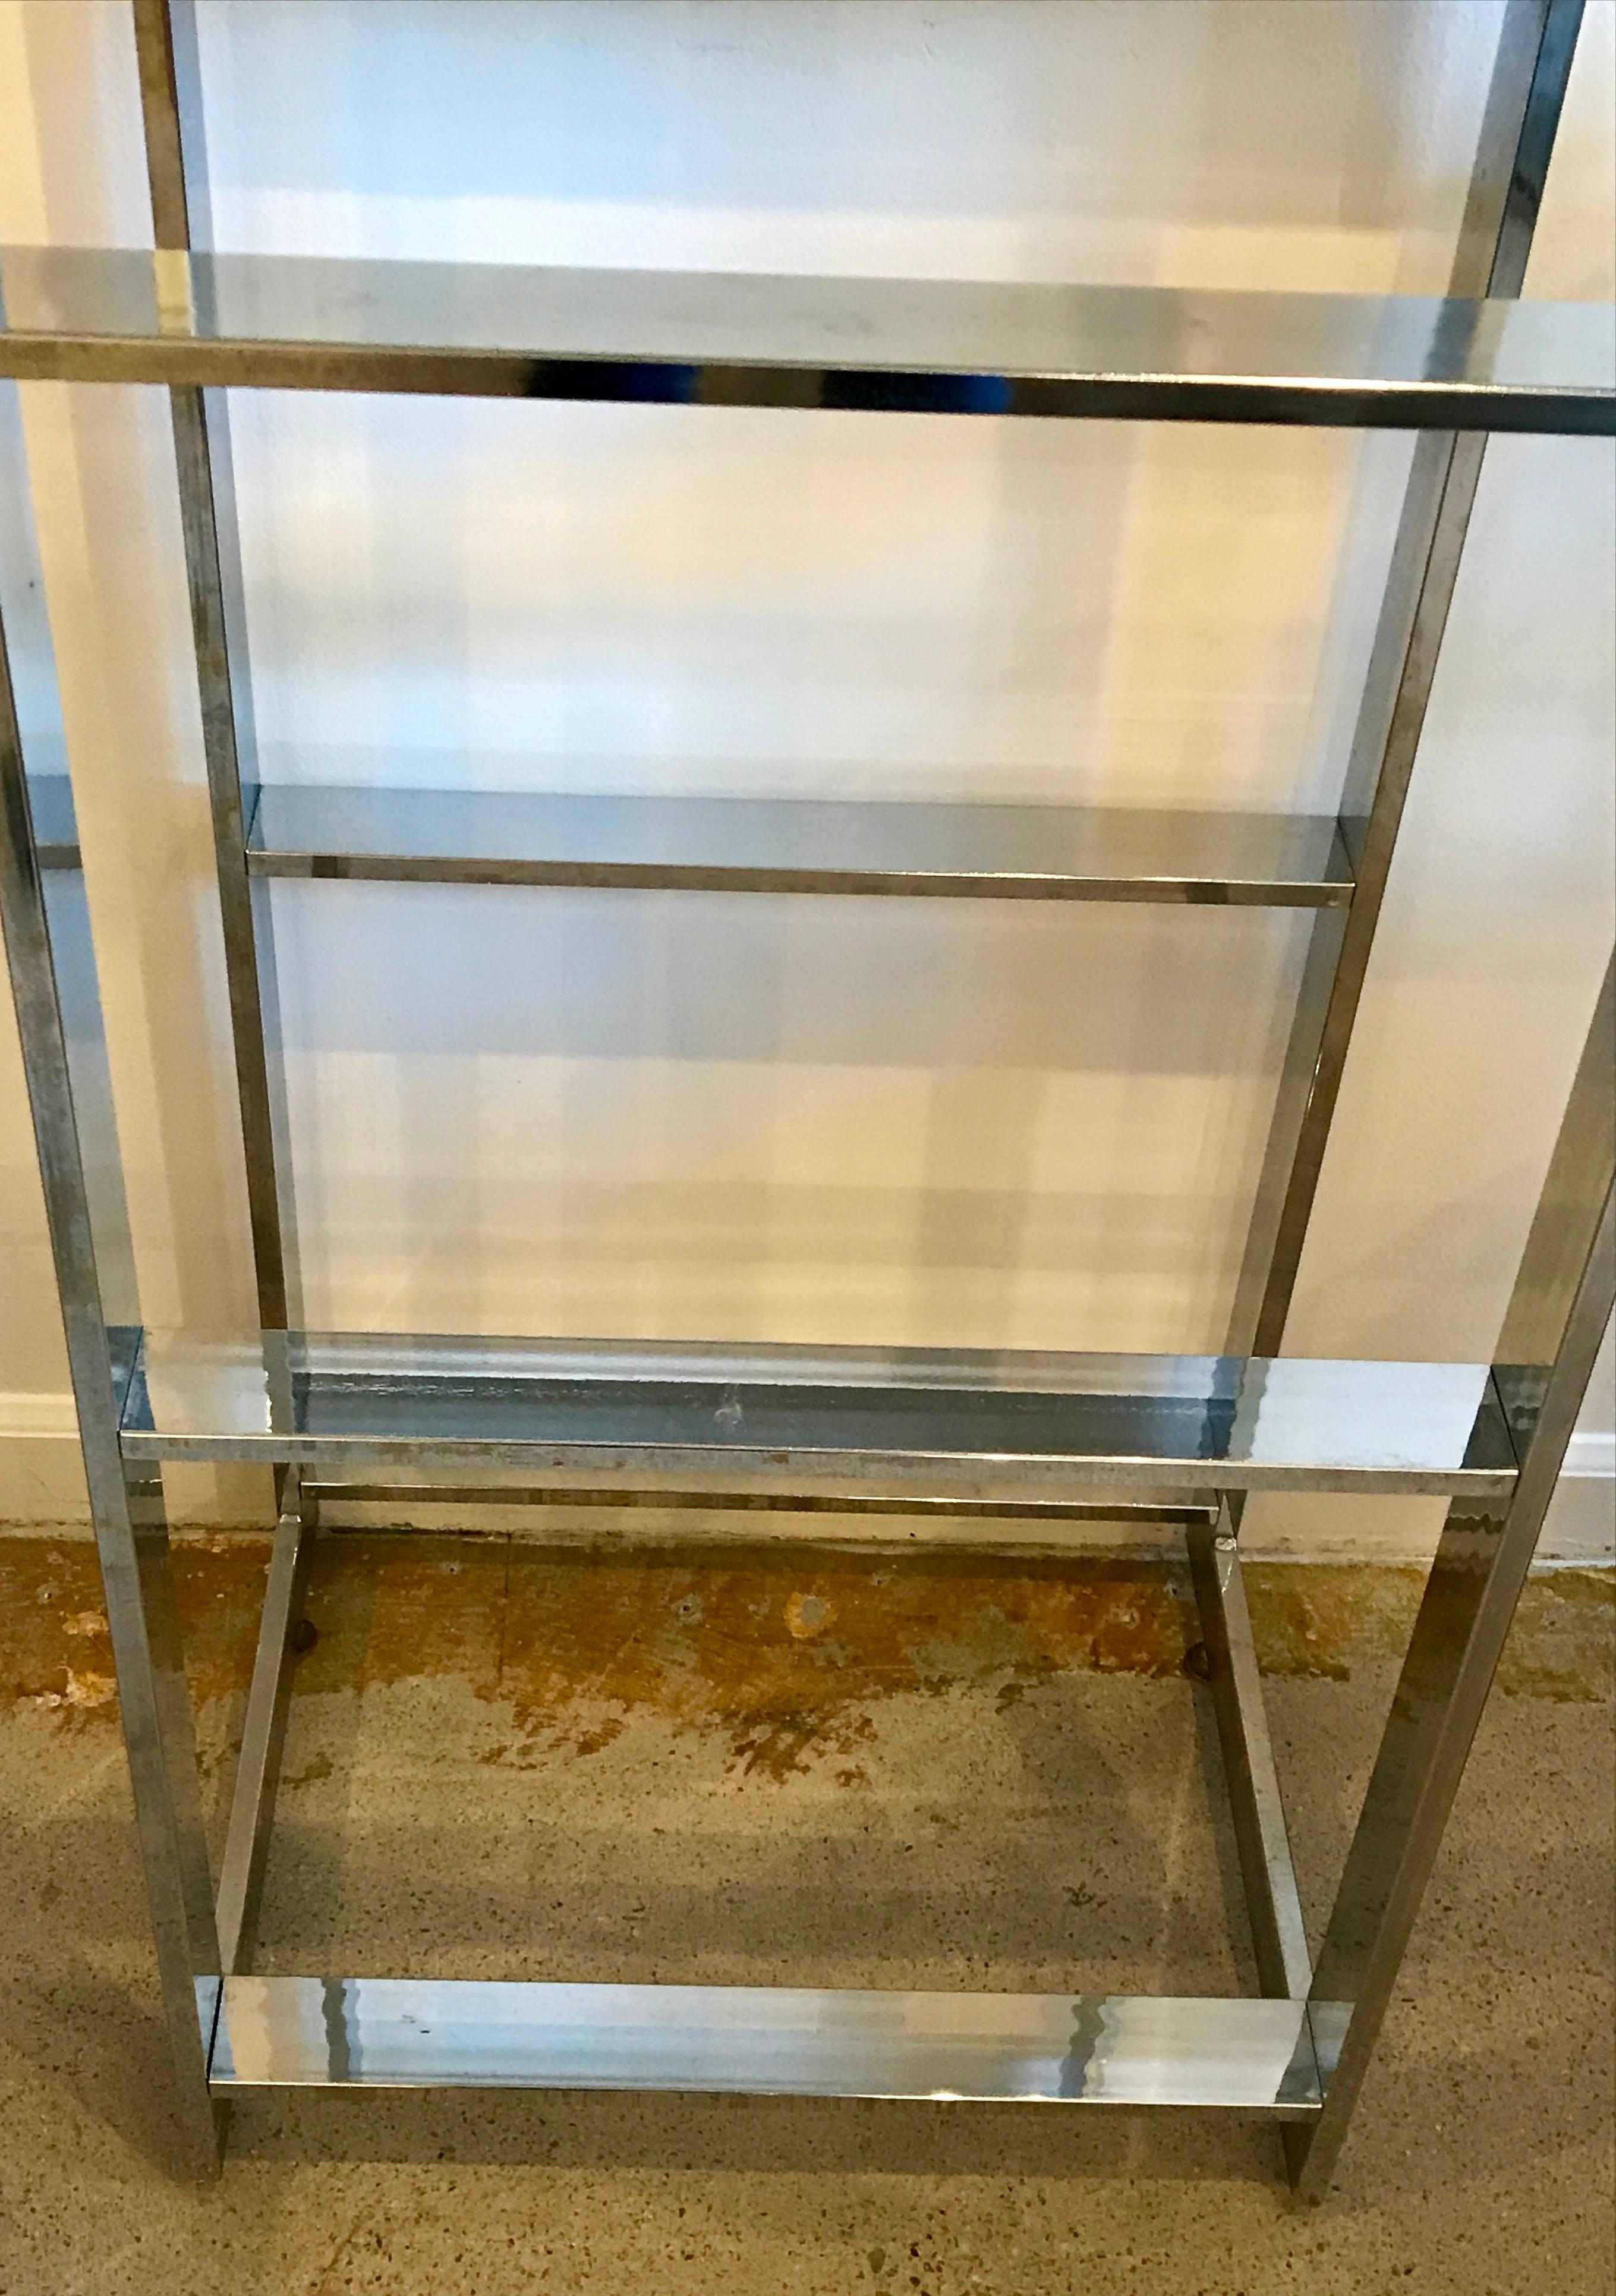 Great chrome and mirror shelf etageres display towers. Mid-Century Modern. Wonderful small size. Can be used all together or separately in any configuration.